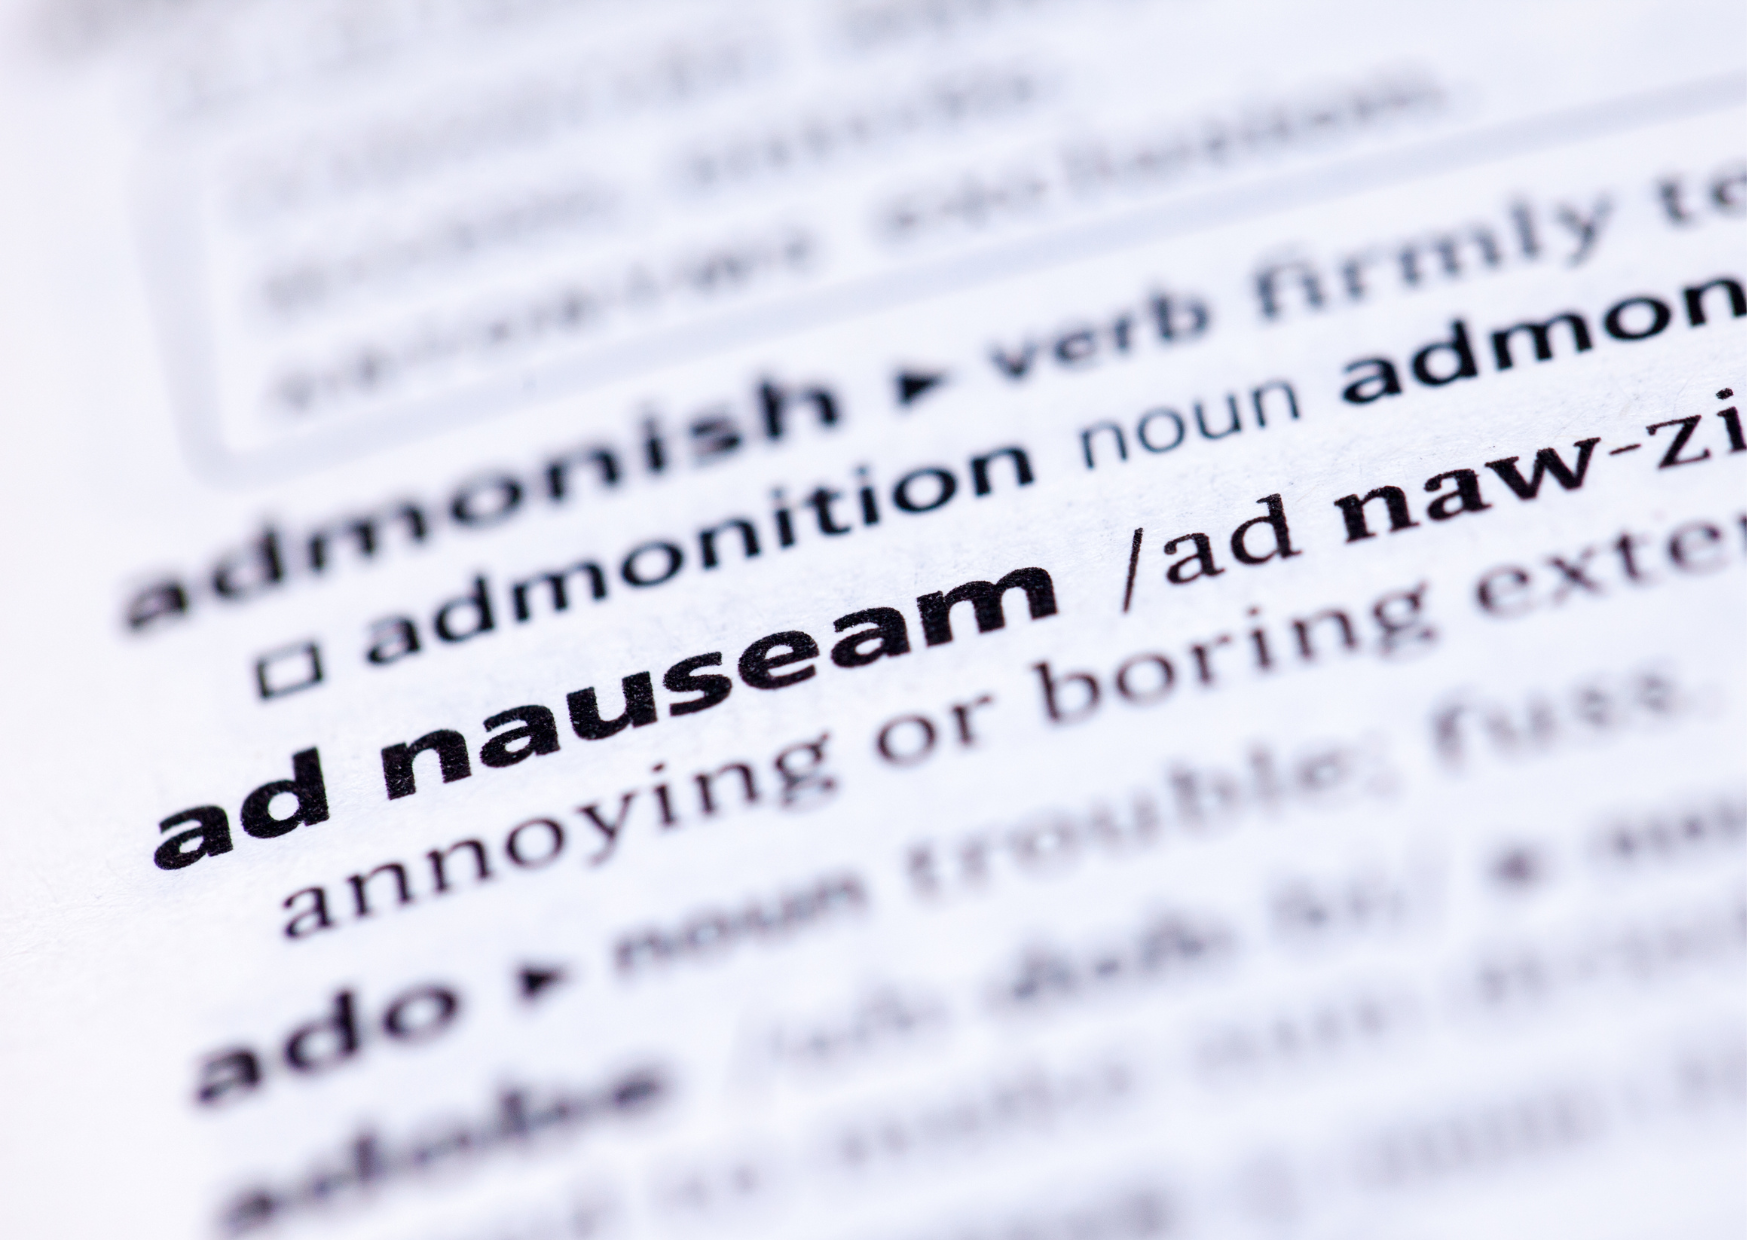 a picture of a dictionary page turned to show the meaning of "ad nauseam"